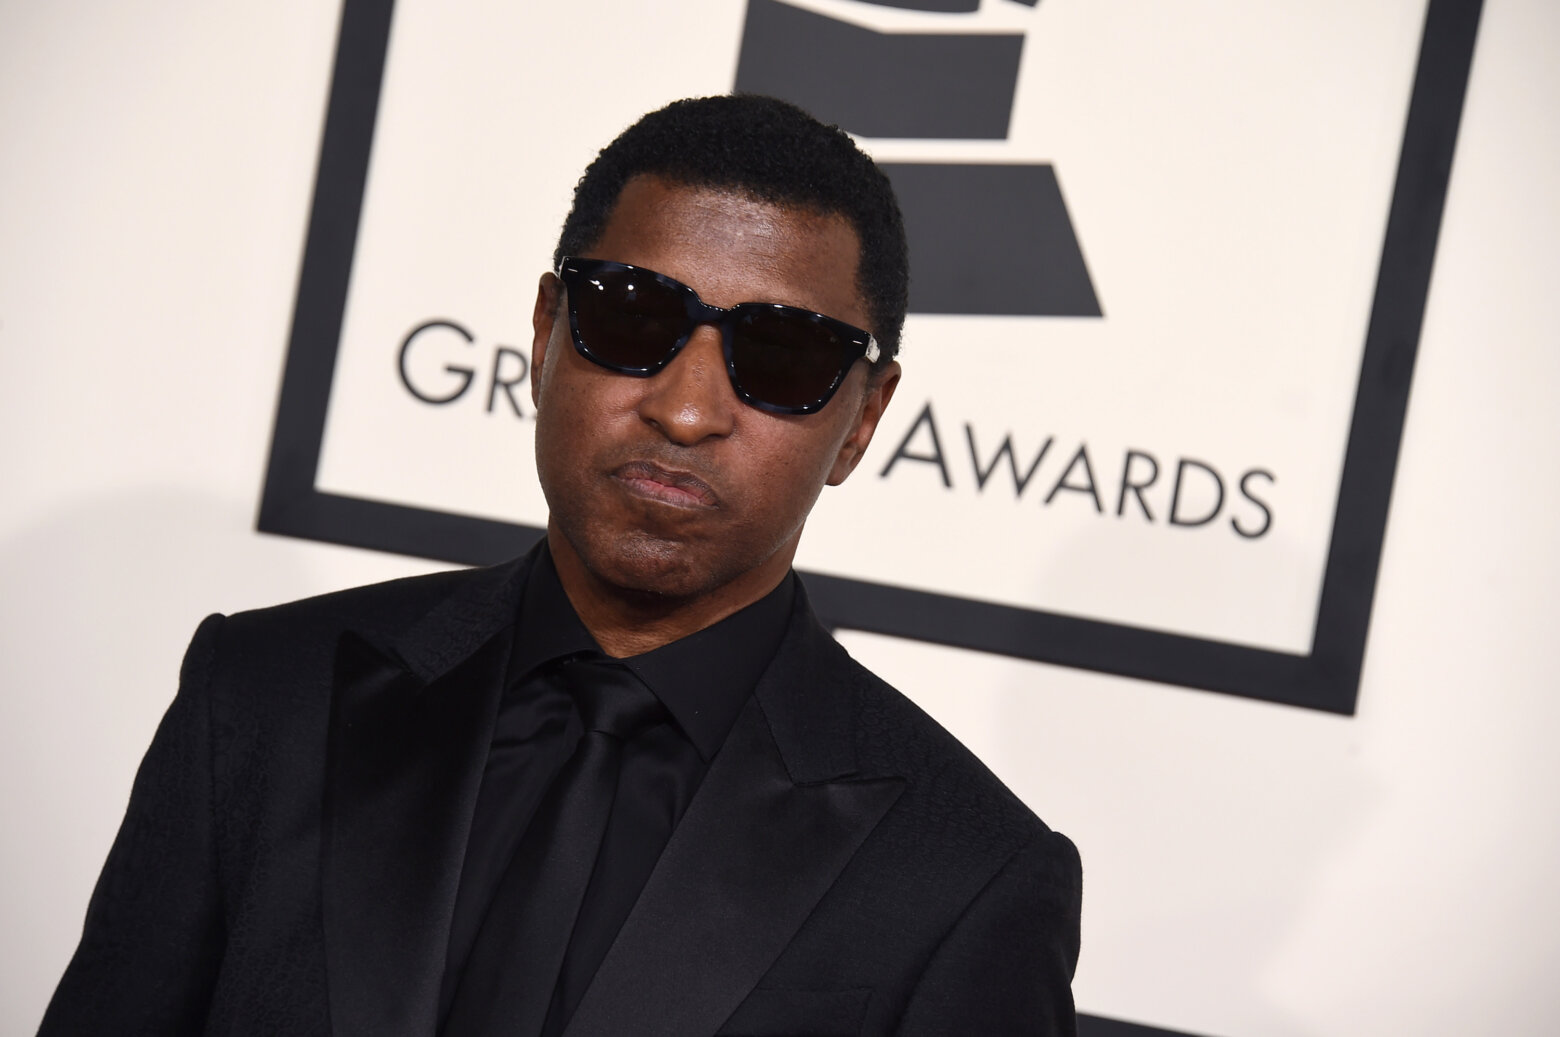 Babyface breaks down the hits en route to MGM National Harbor this weekend